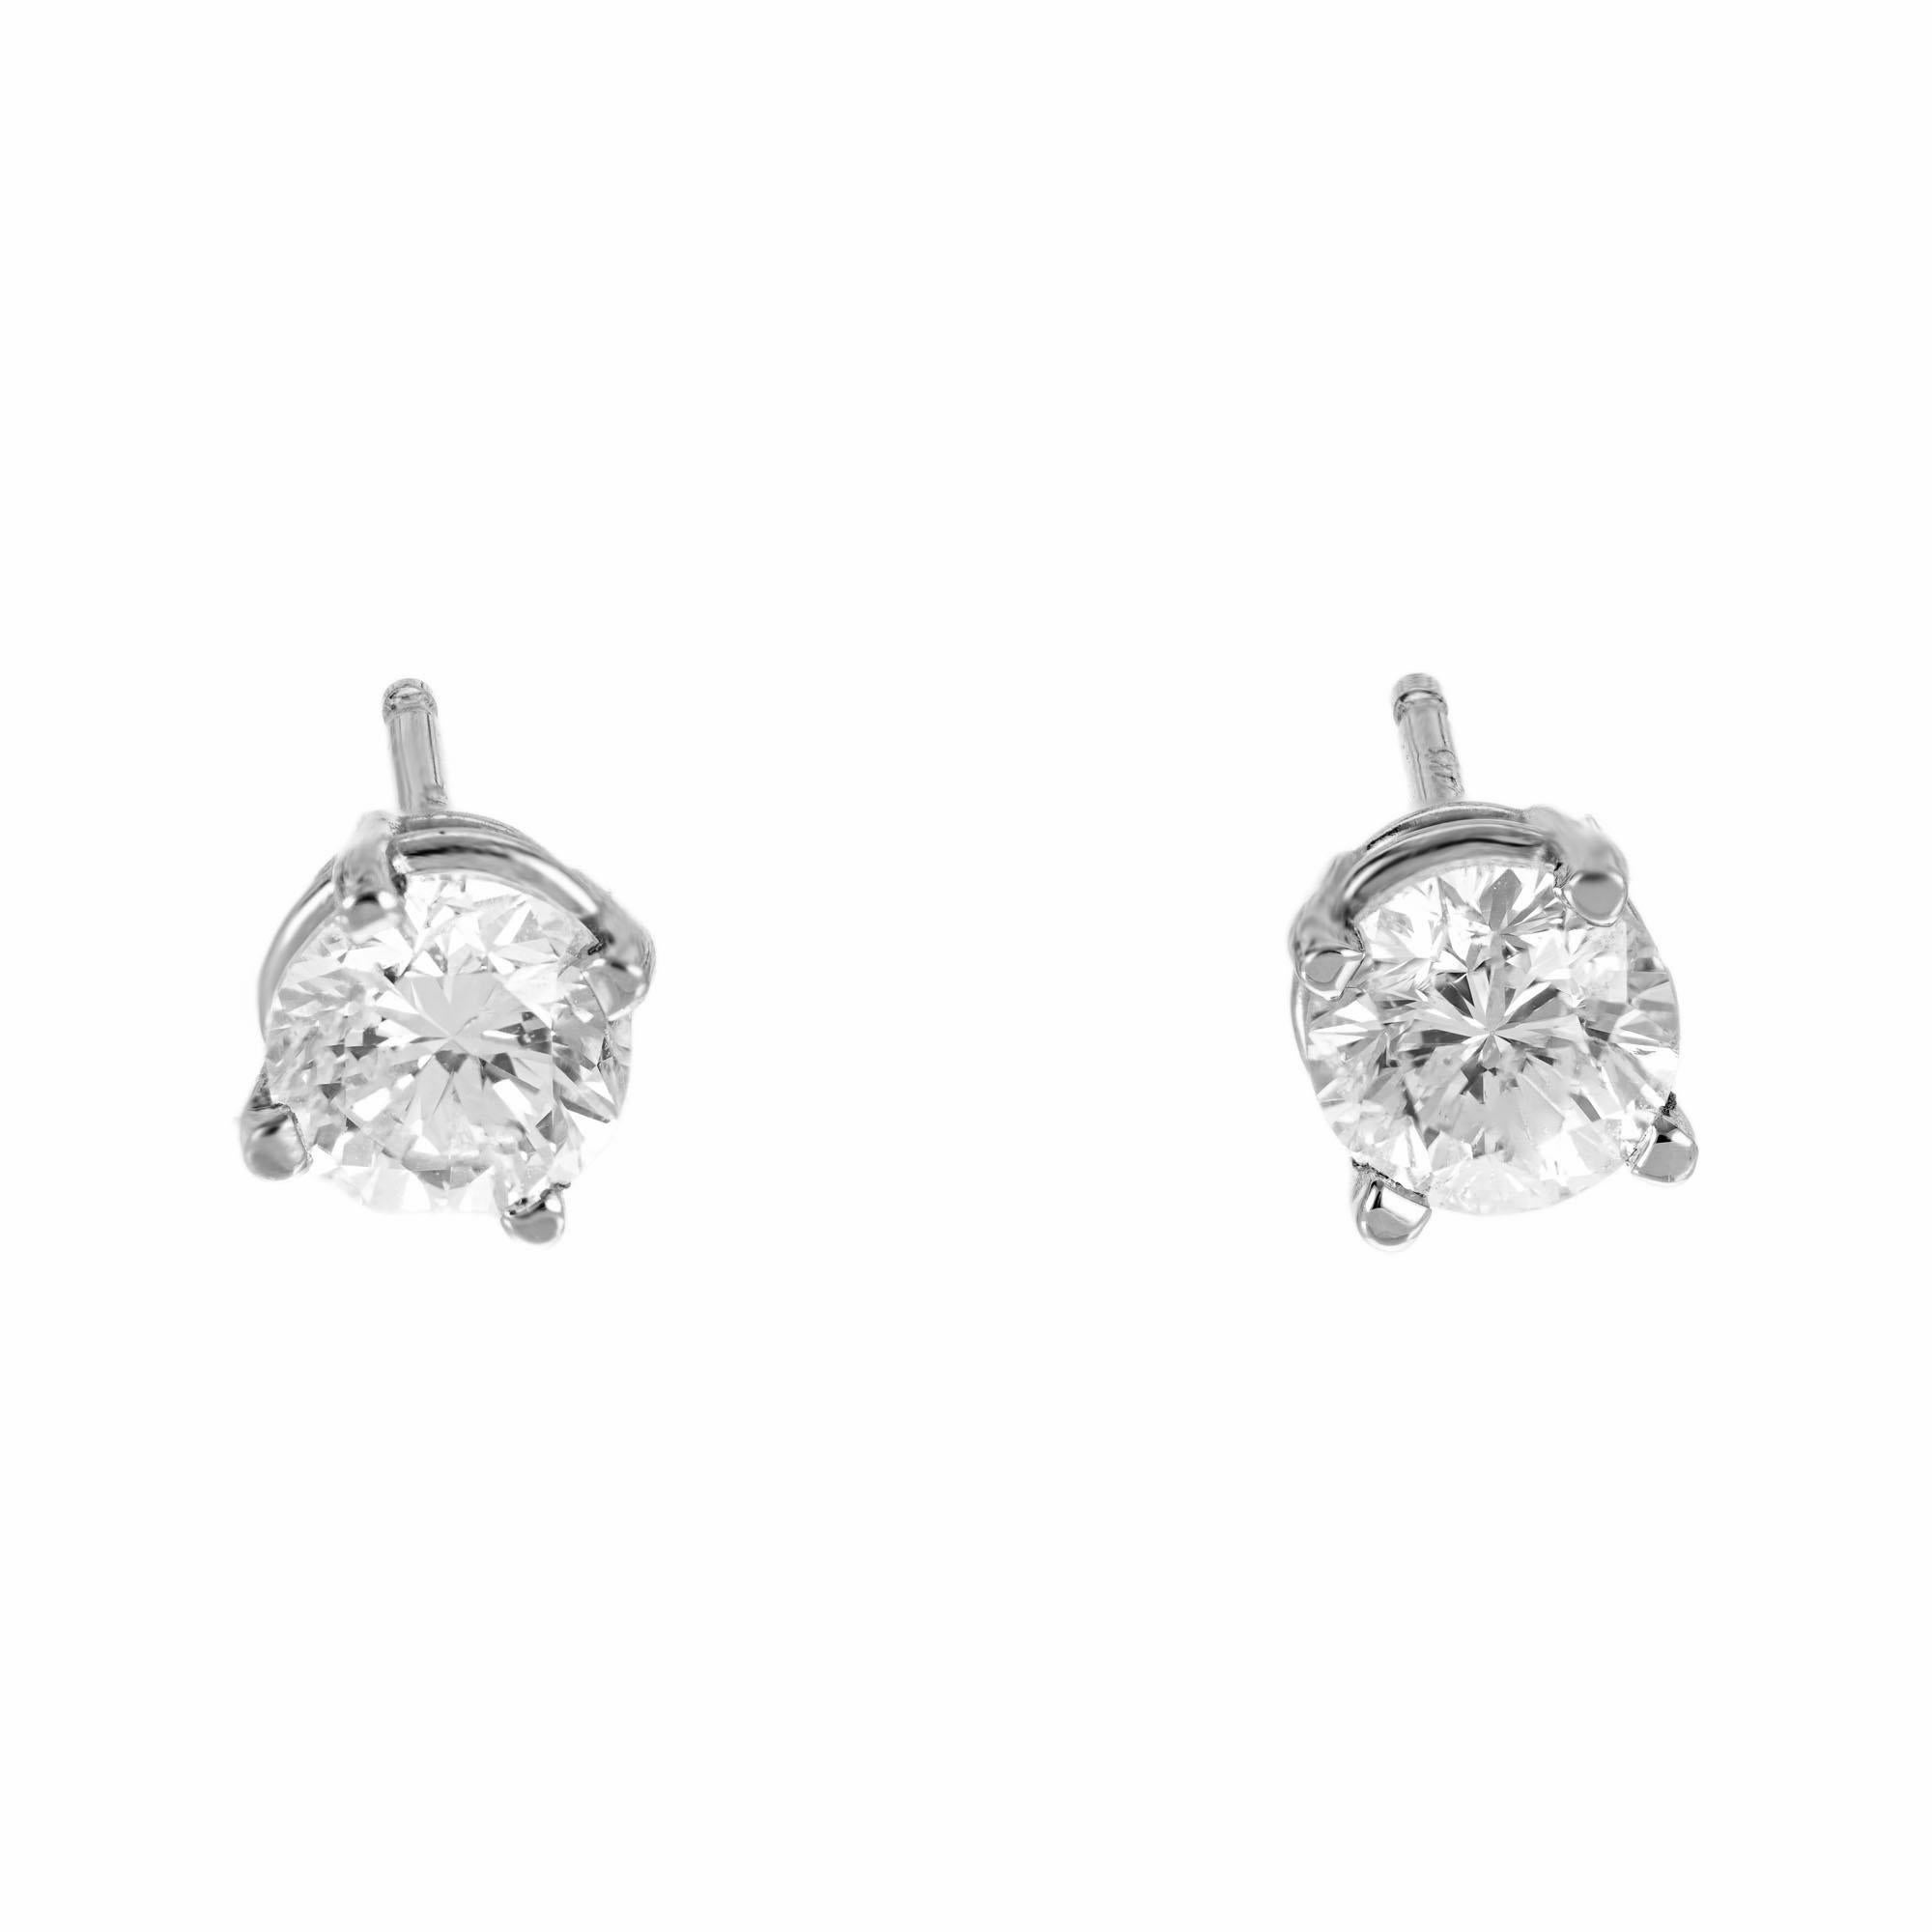 2 round diamond stud earrings, in simple 14k white gold basket settings. 

2 round diamonds, approx. total weight 1.00 H, SI1-SI2
14k white gold
